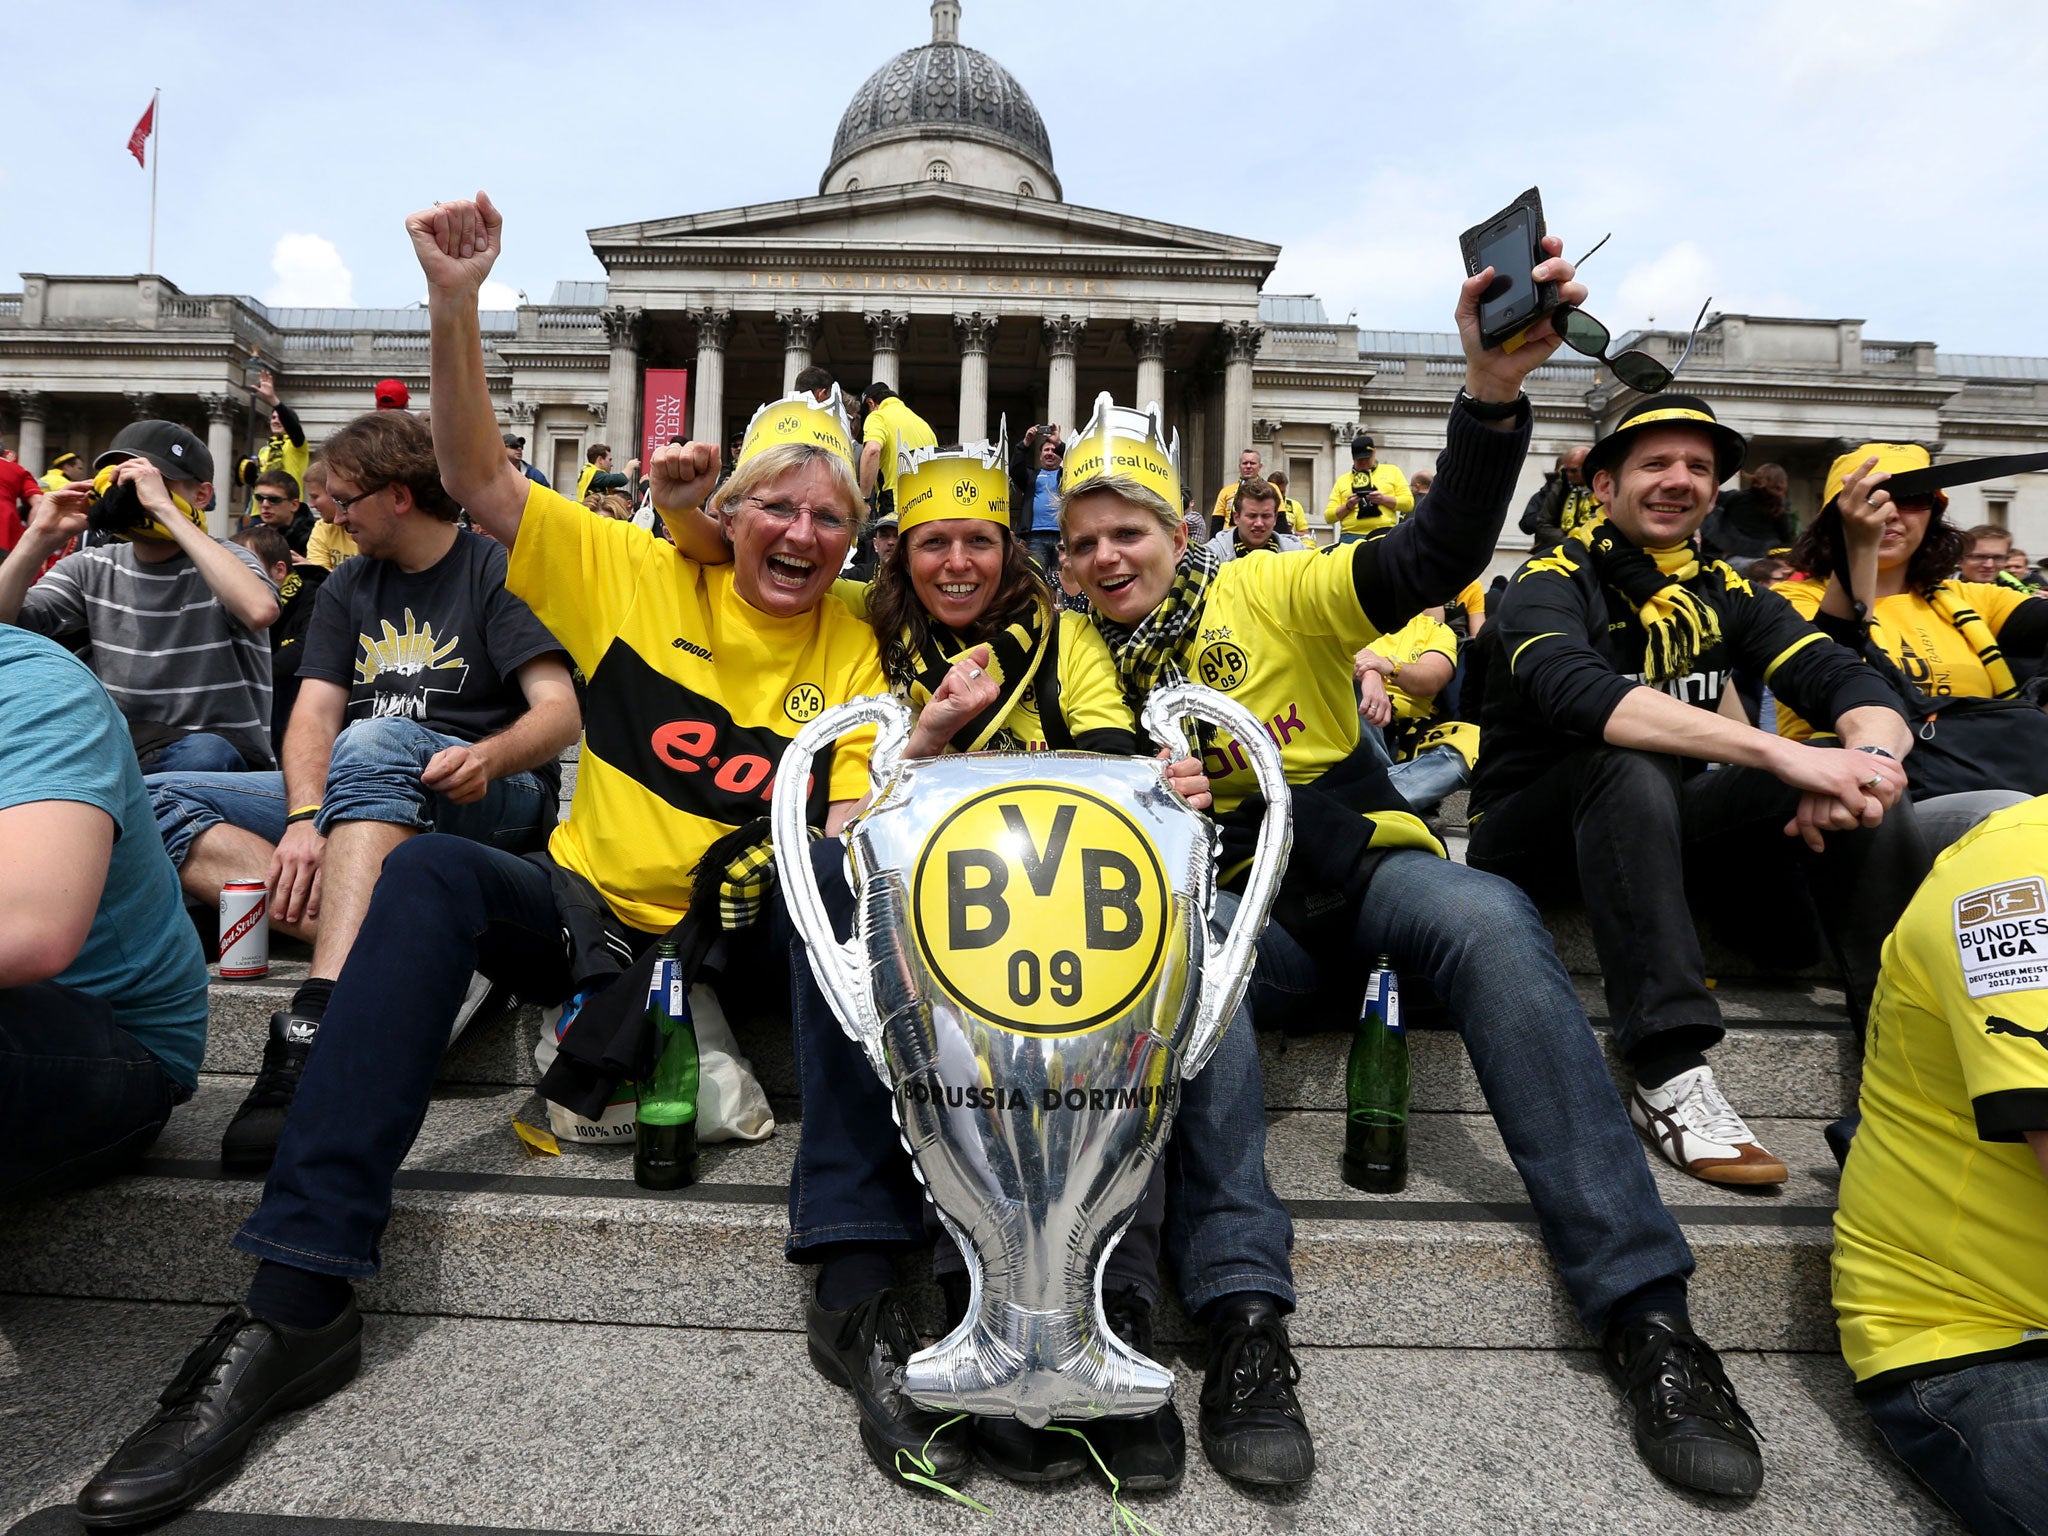 London party for German football fans: About 150,000 ...